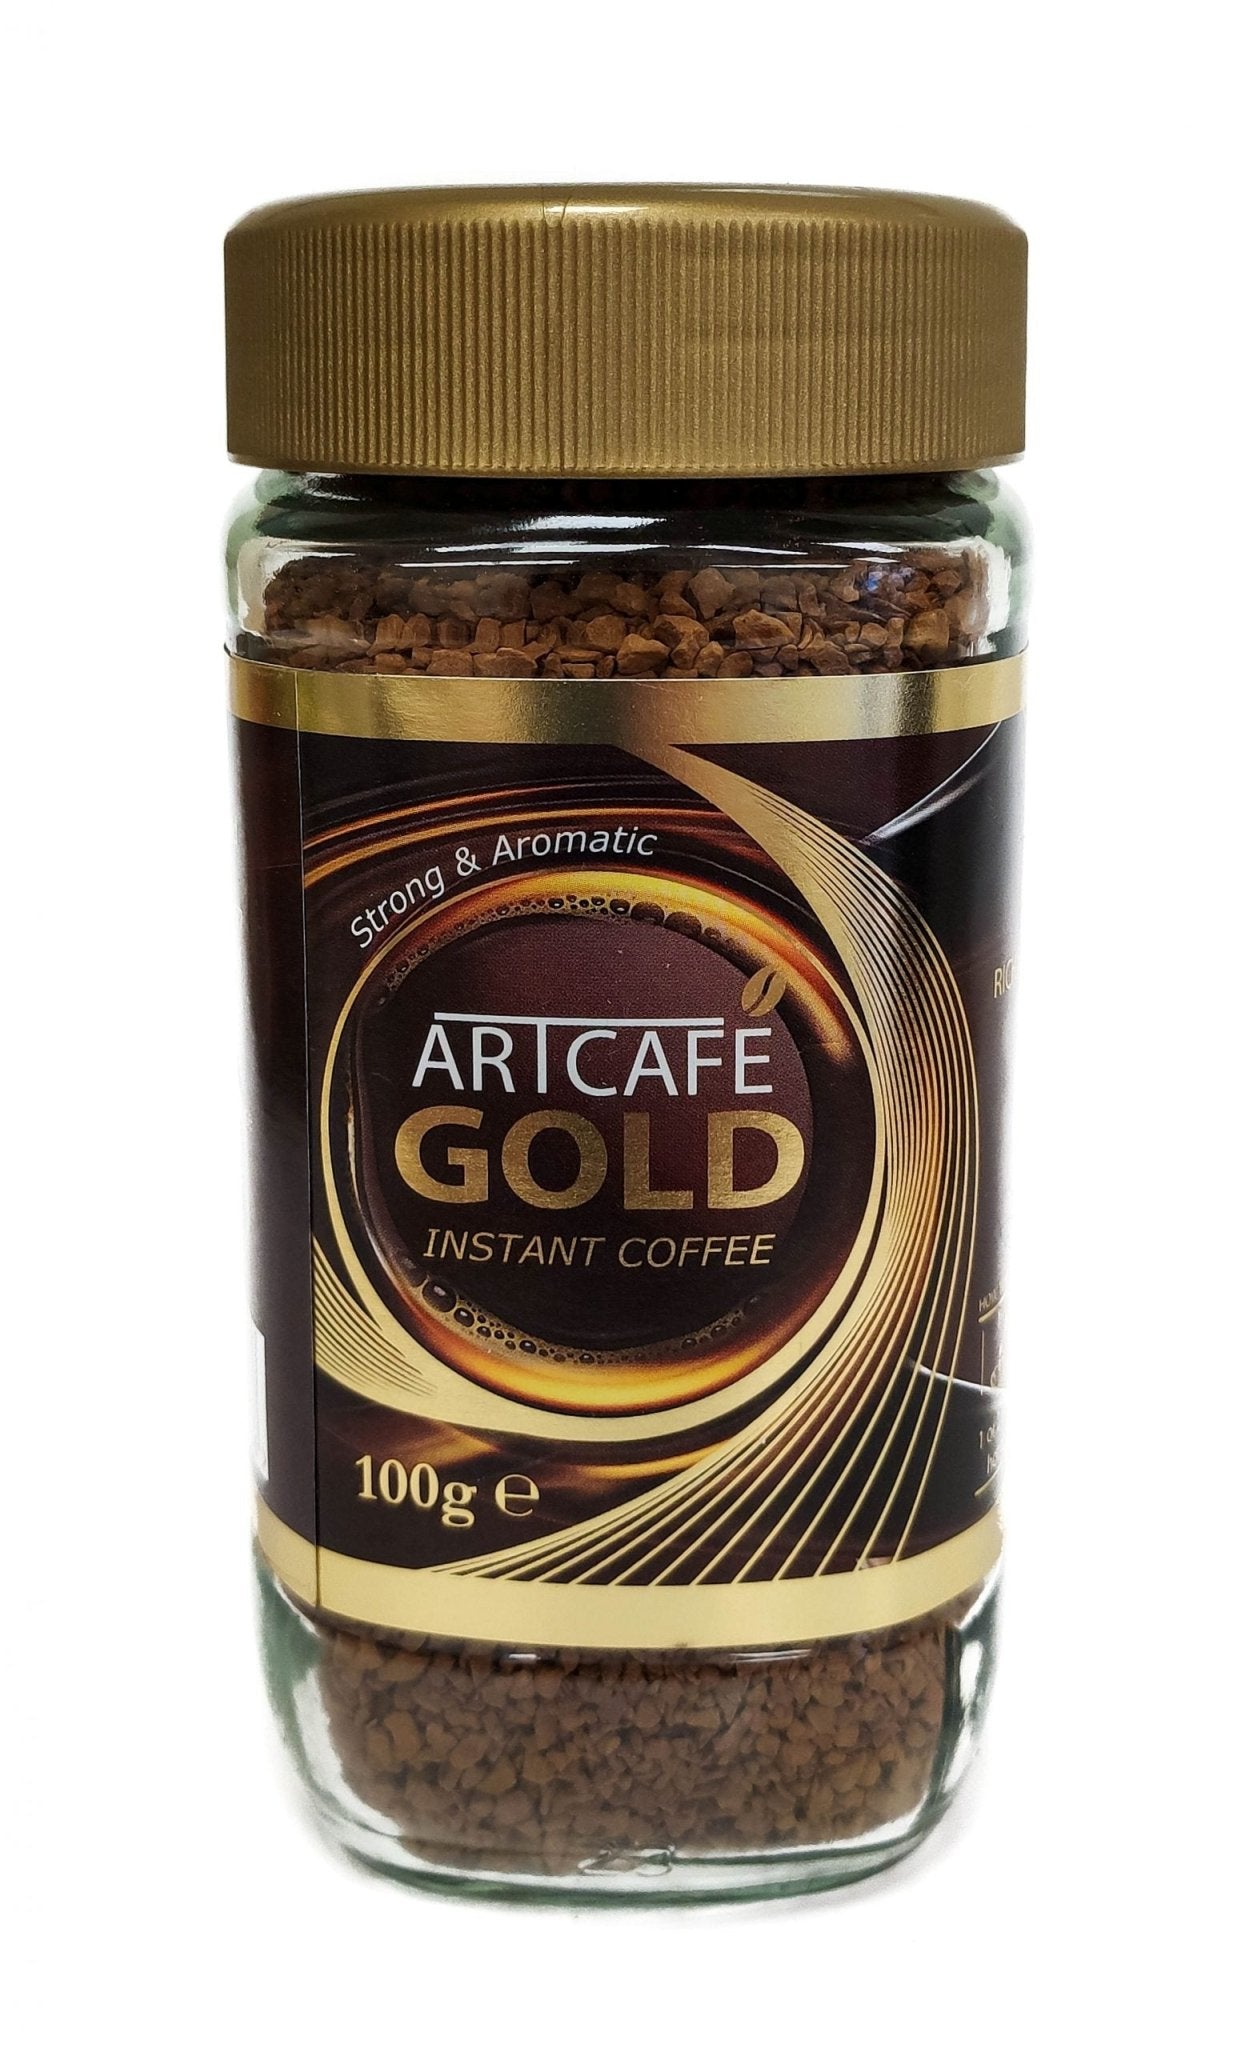 Artcafe Gold Instant Coffee (100G) - Aytac Foods